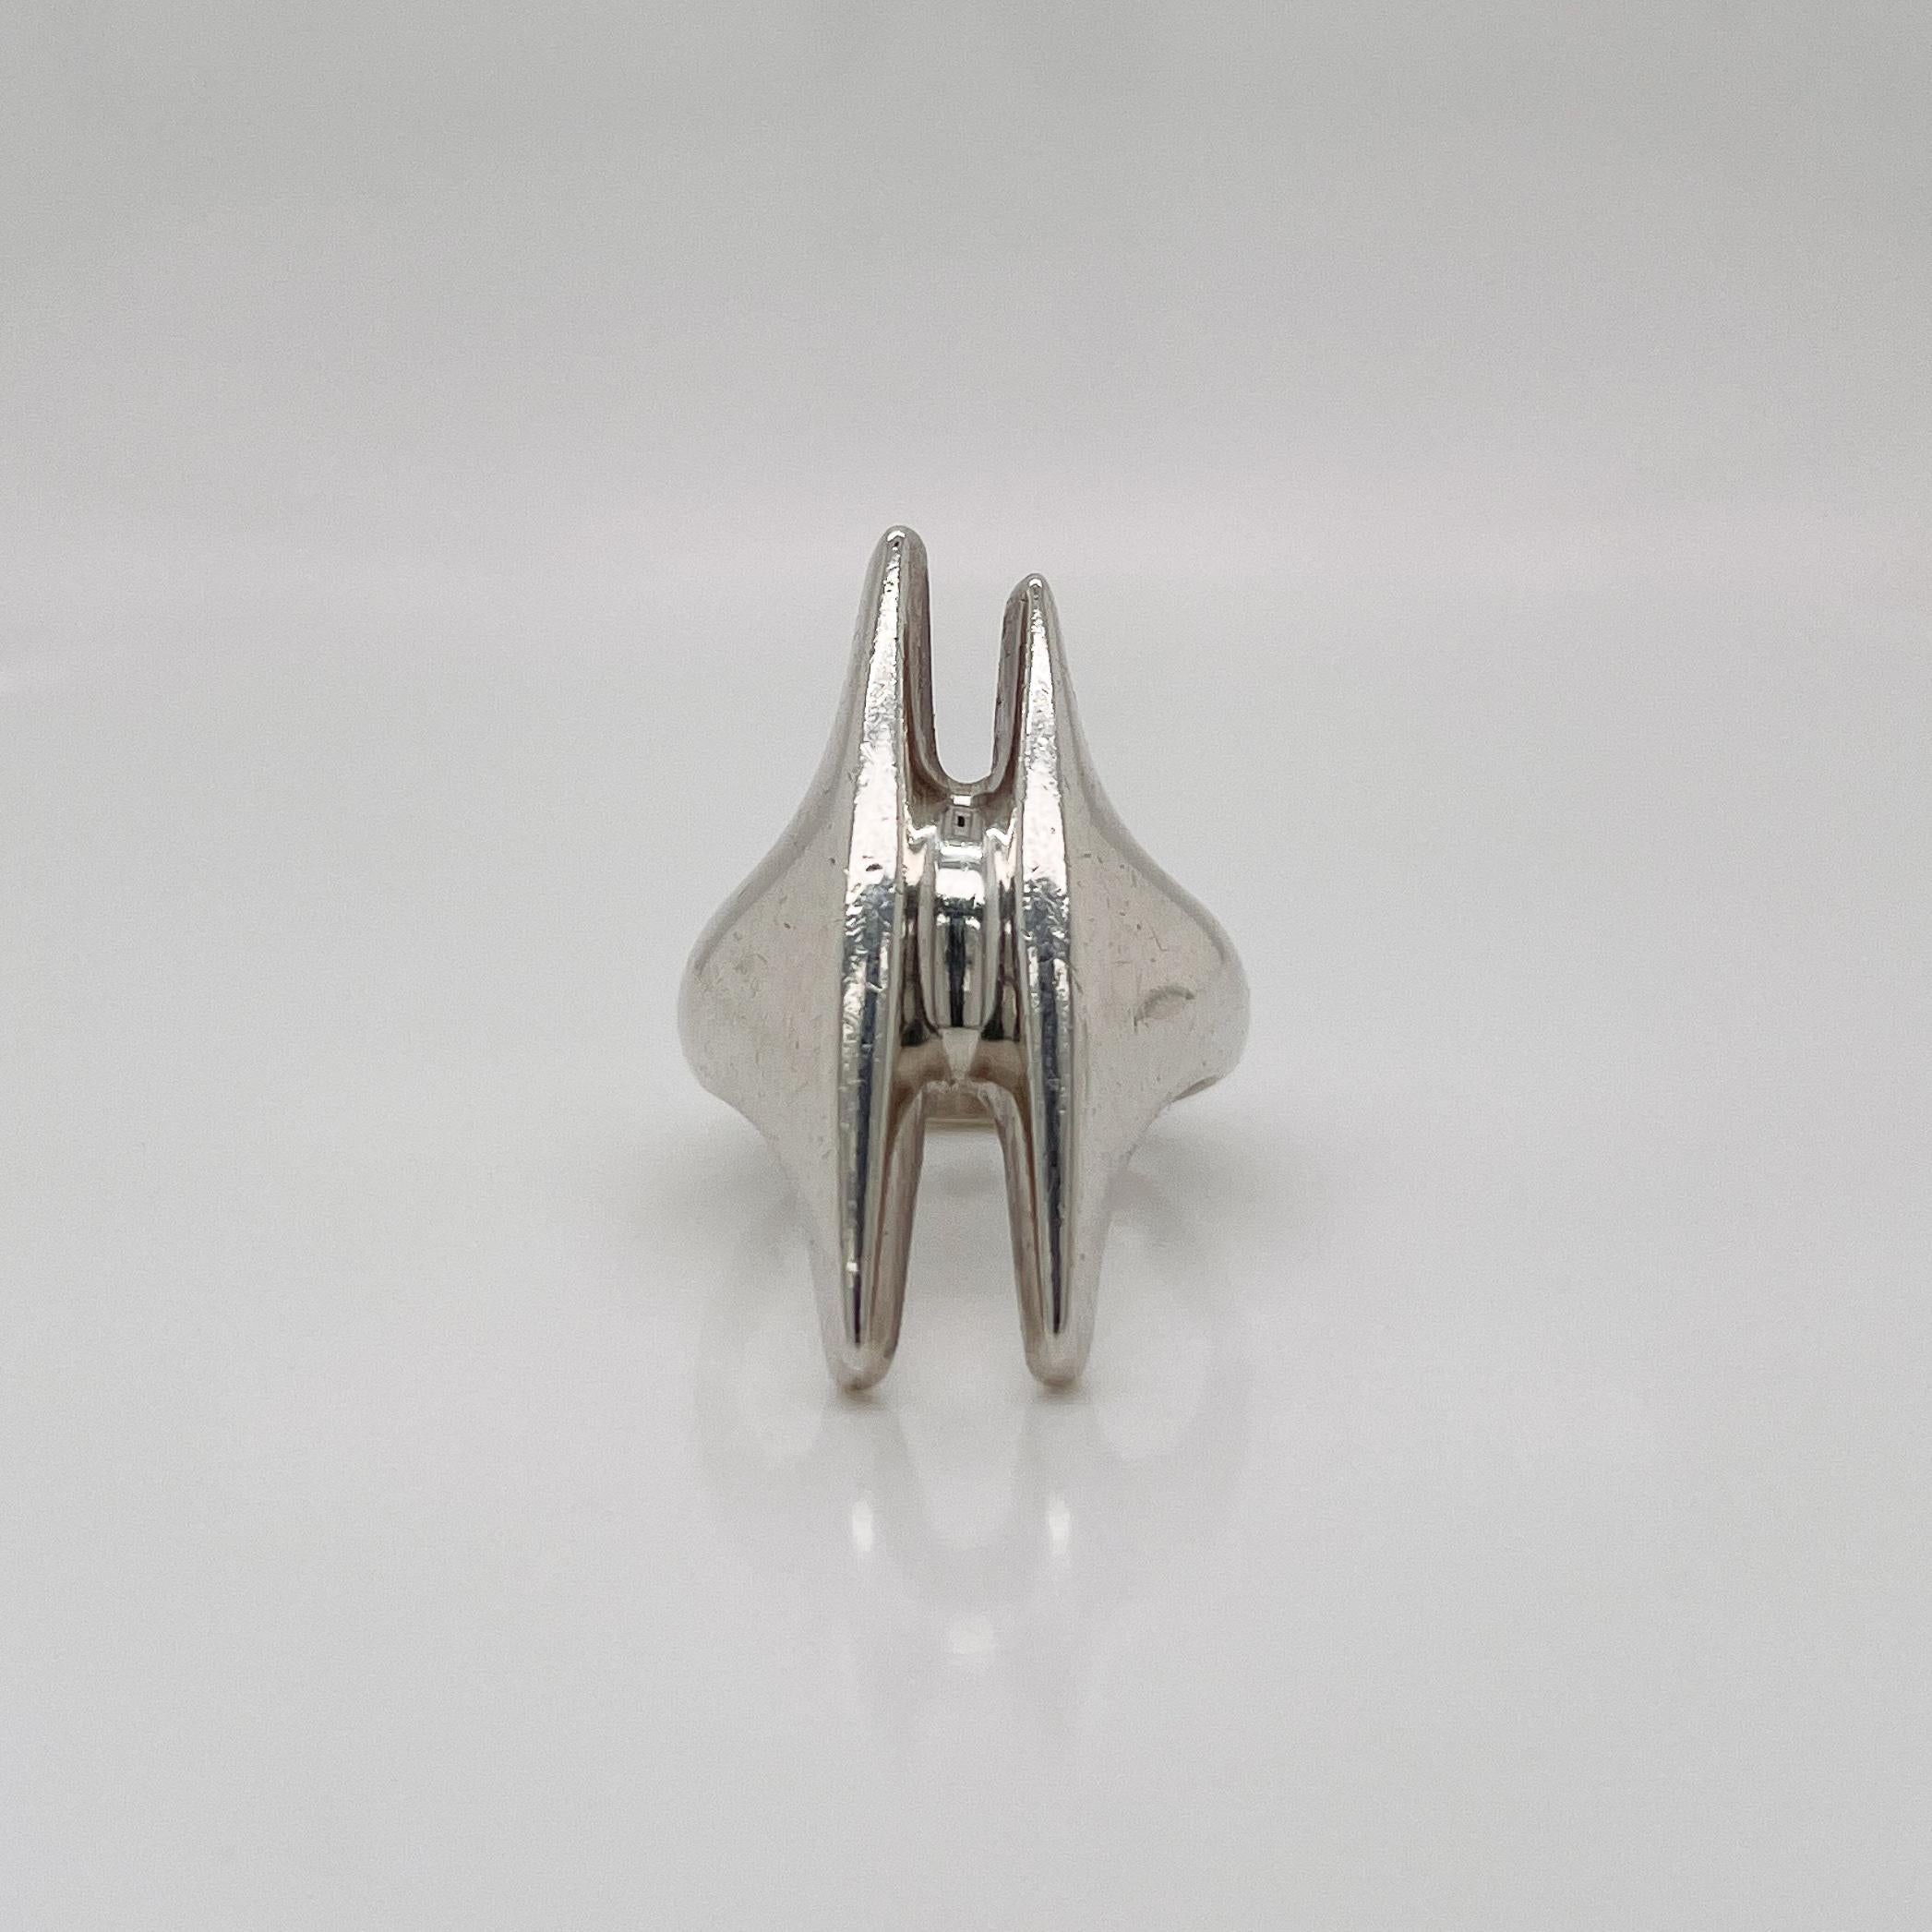 A fine George Jensen ring.

In sterling silver. 

Model No. 126. 

Designed by Henning Koppel. 

Simply a great Jensen ring!

Date:
20th Century

Overall Condition:
It is in overall good, as-pictured, used estate condition with some fine & light